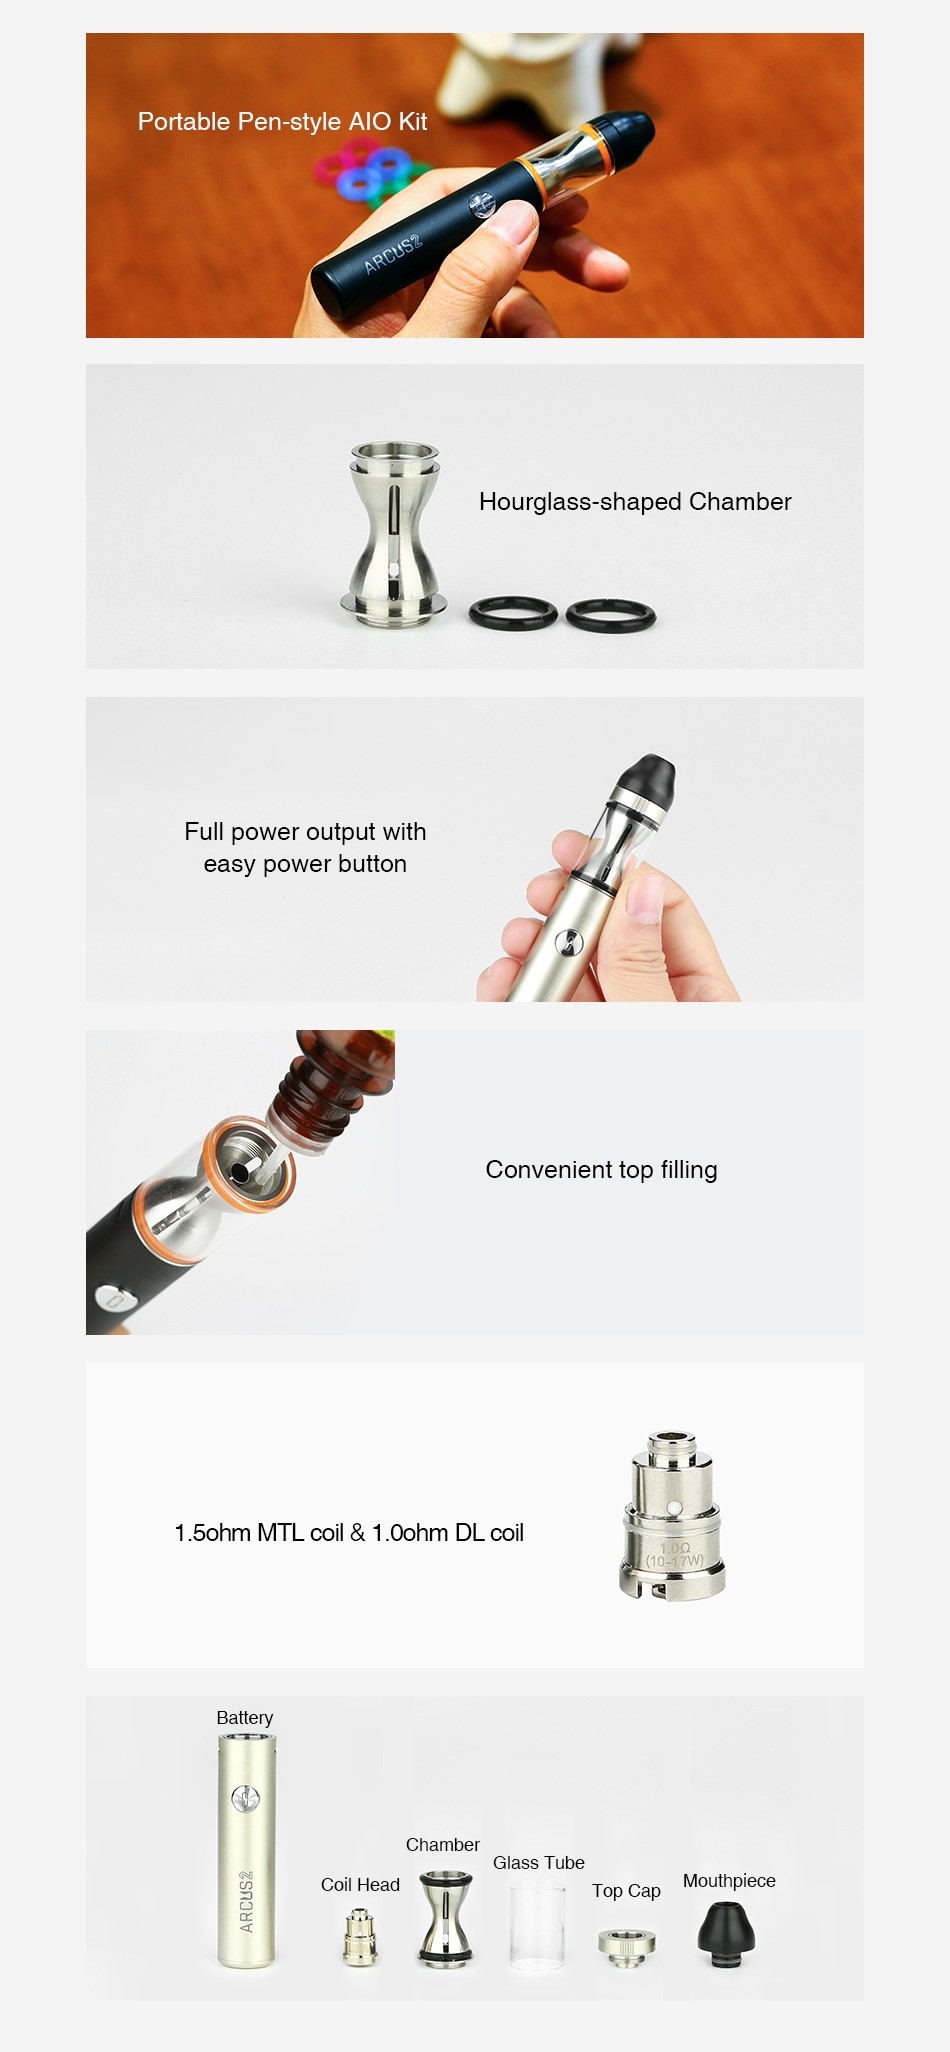 VapeOnly Arcus 2 AIO Starter Kit 750mAh Portable Pen style Alo Kit Hourglass shaped Chamber Full power output with easy power button Convenient top filling 1 5ohm mtl coil 10ohm dl coil Chamber Glass Tube Coil head Top Cap Mouthpiece